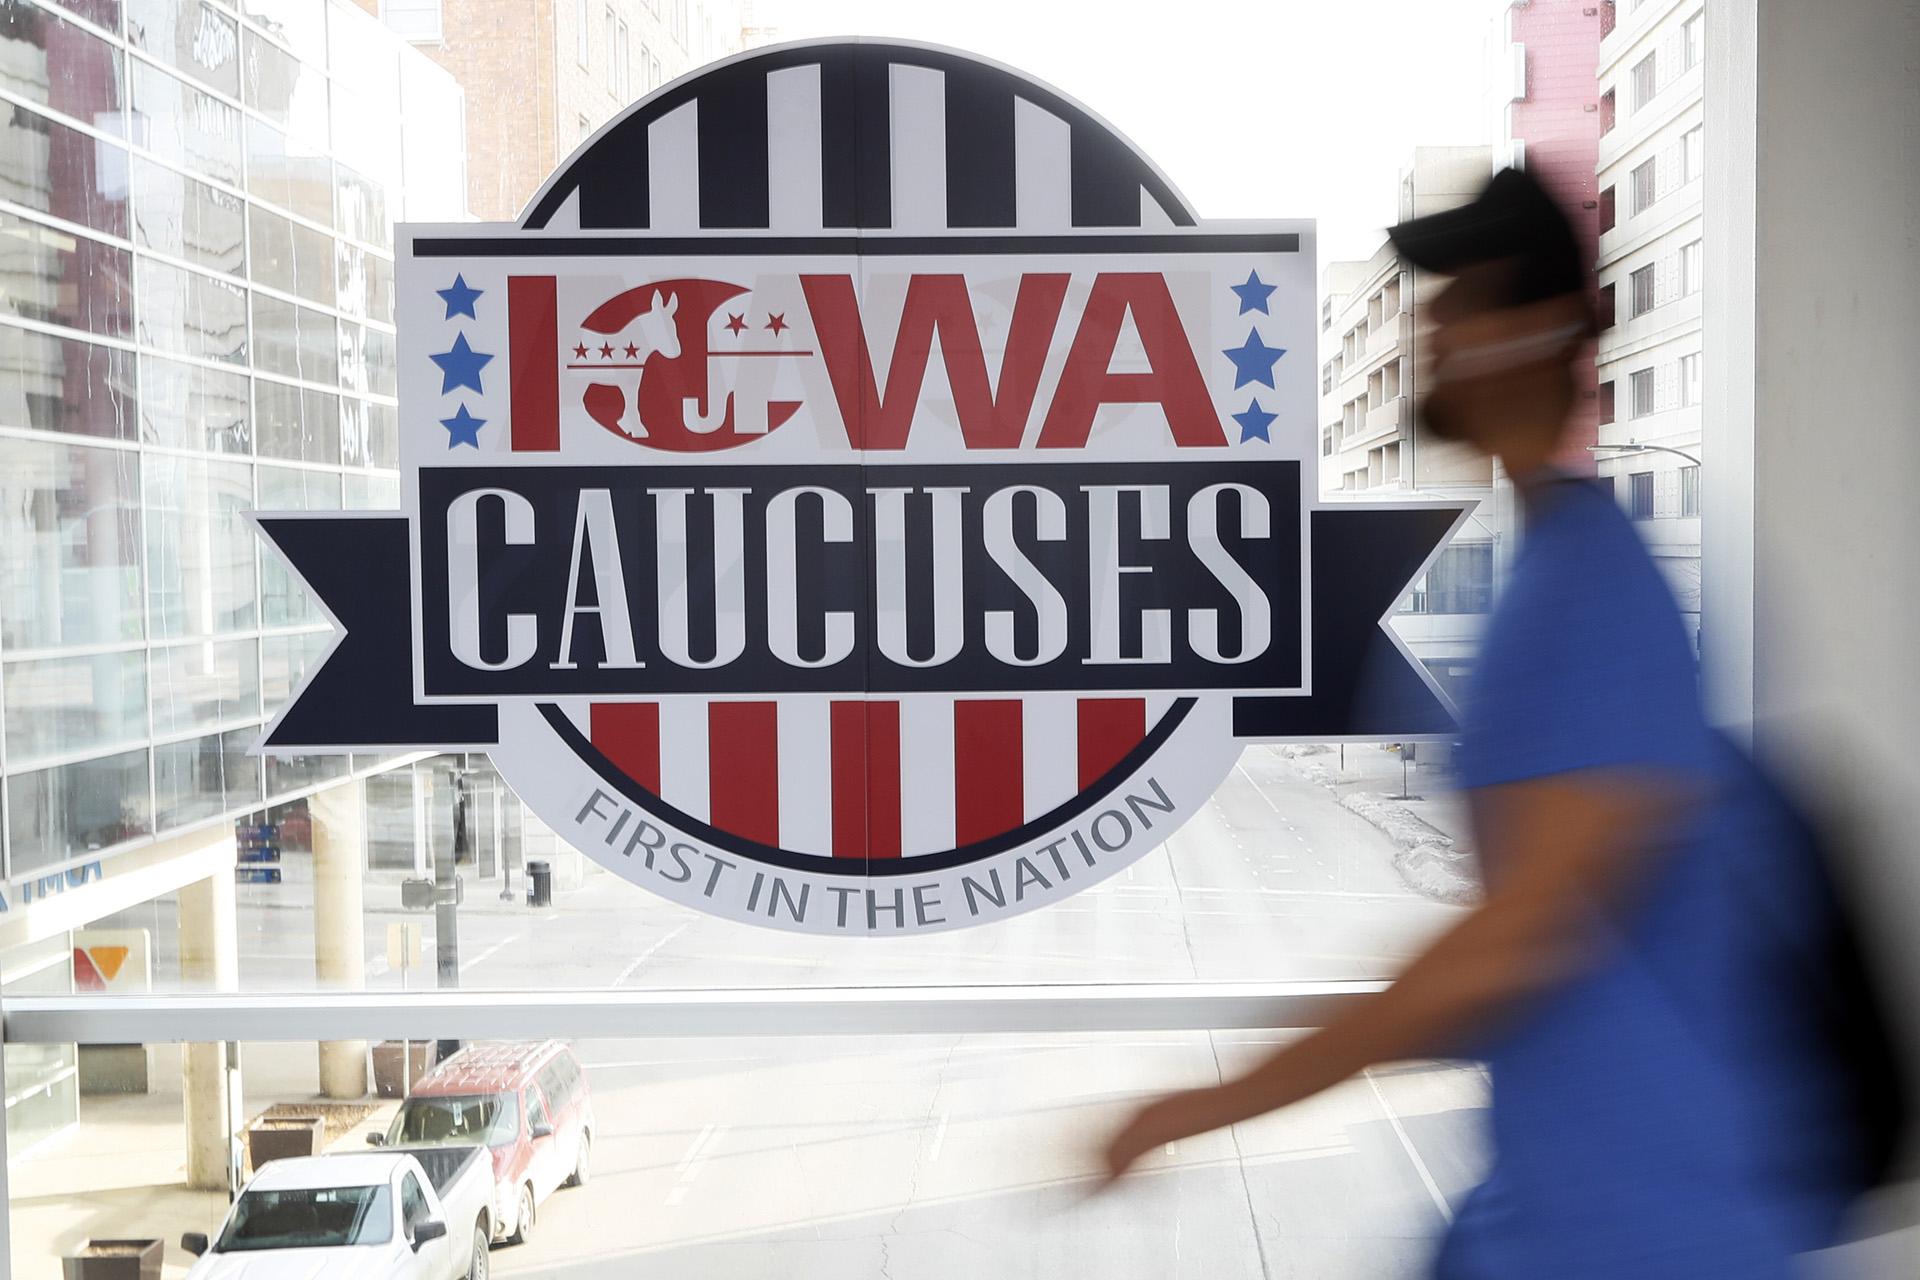 A pedestrian walks past a sign for the Iowa Caucuses on a downtown skywalk, Tuesday, Feb. 4, 2020, in Des Moines, Iowa. (AP Photo / Charlie Neibergall)